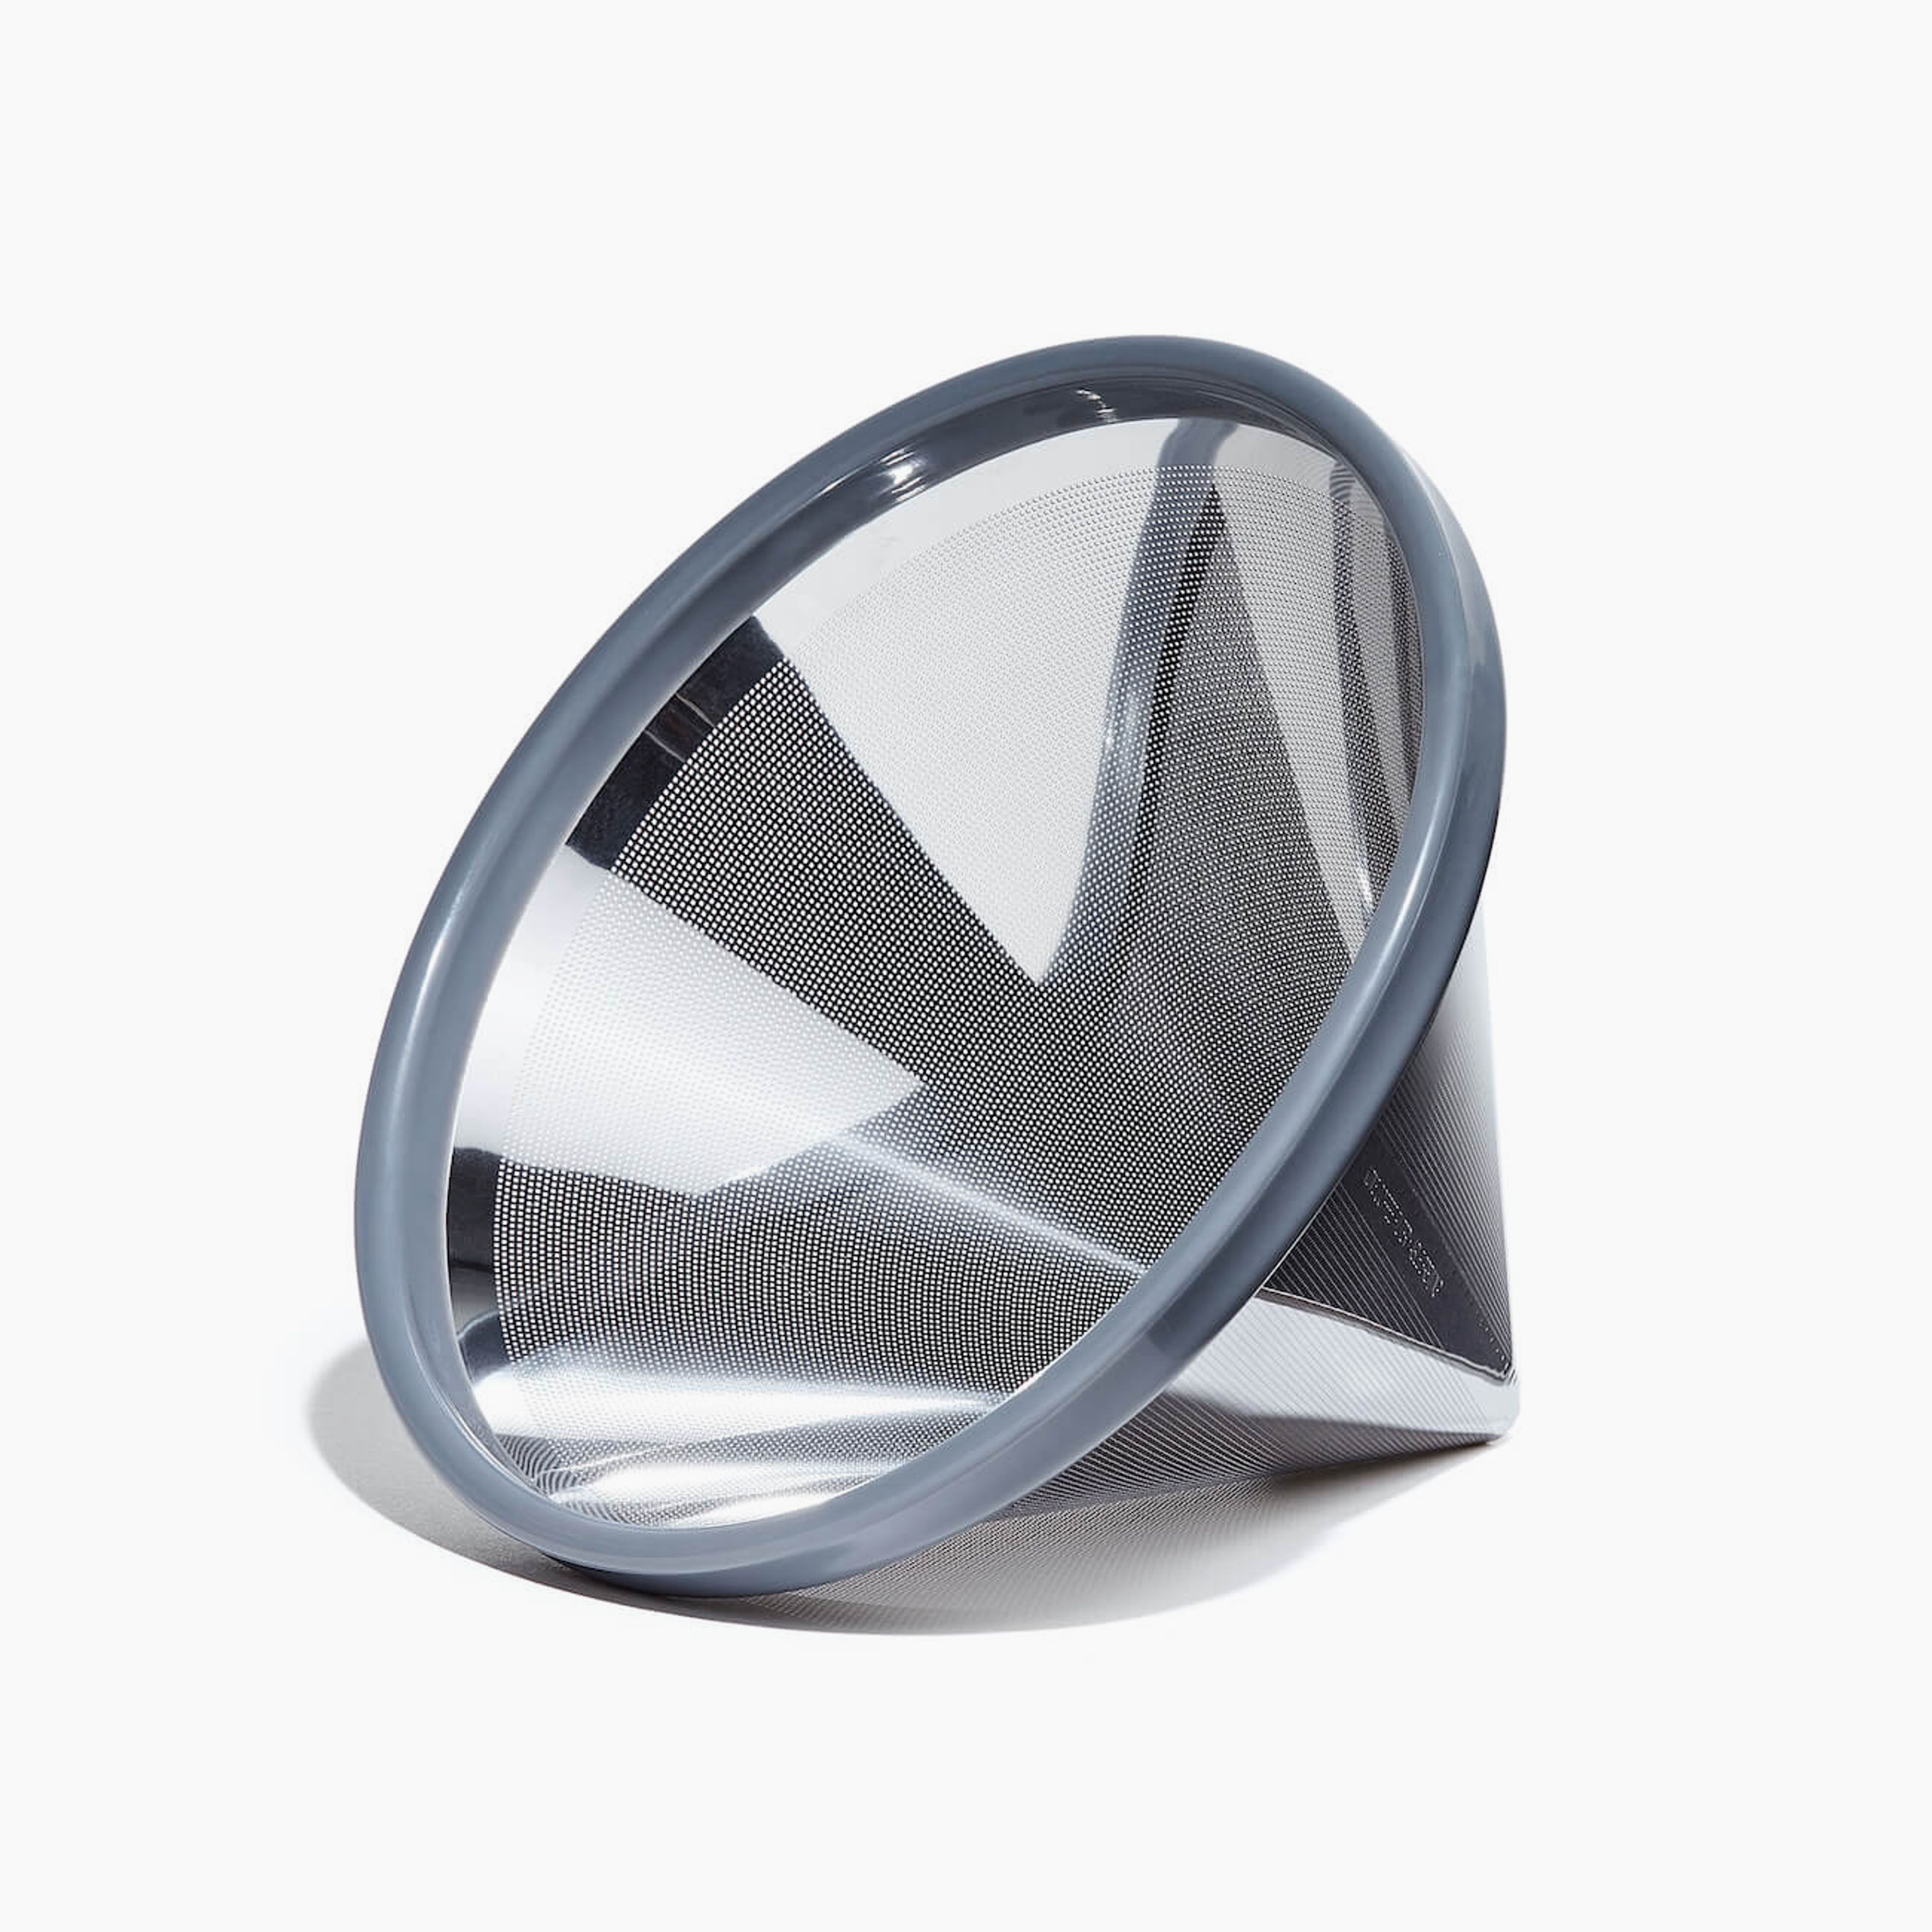 Kone Reusable Coffee Filter by Able Brewing